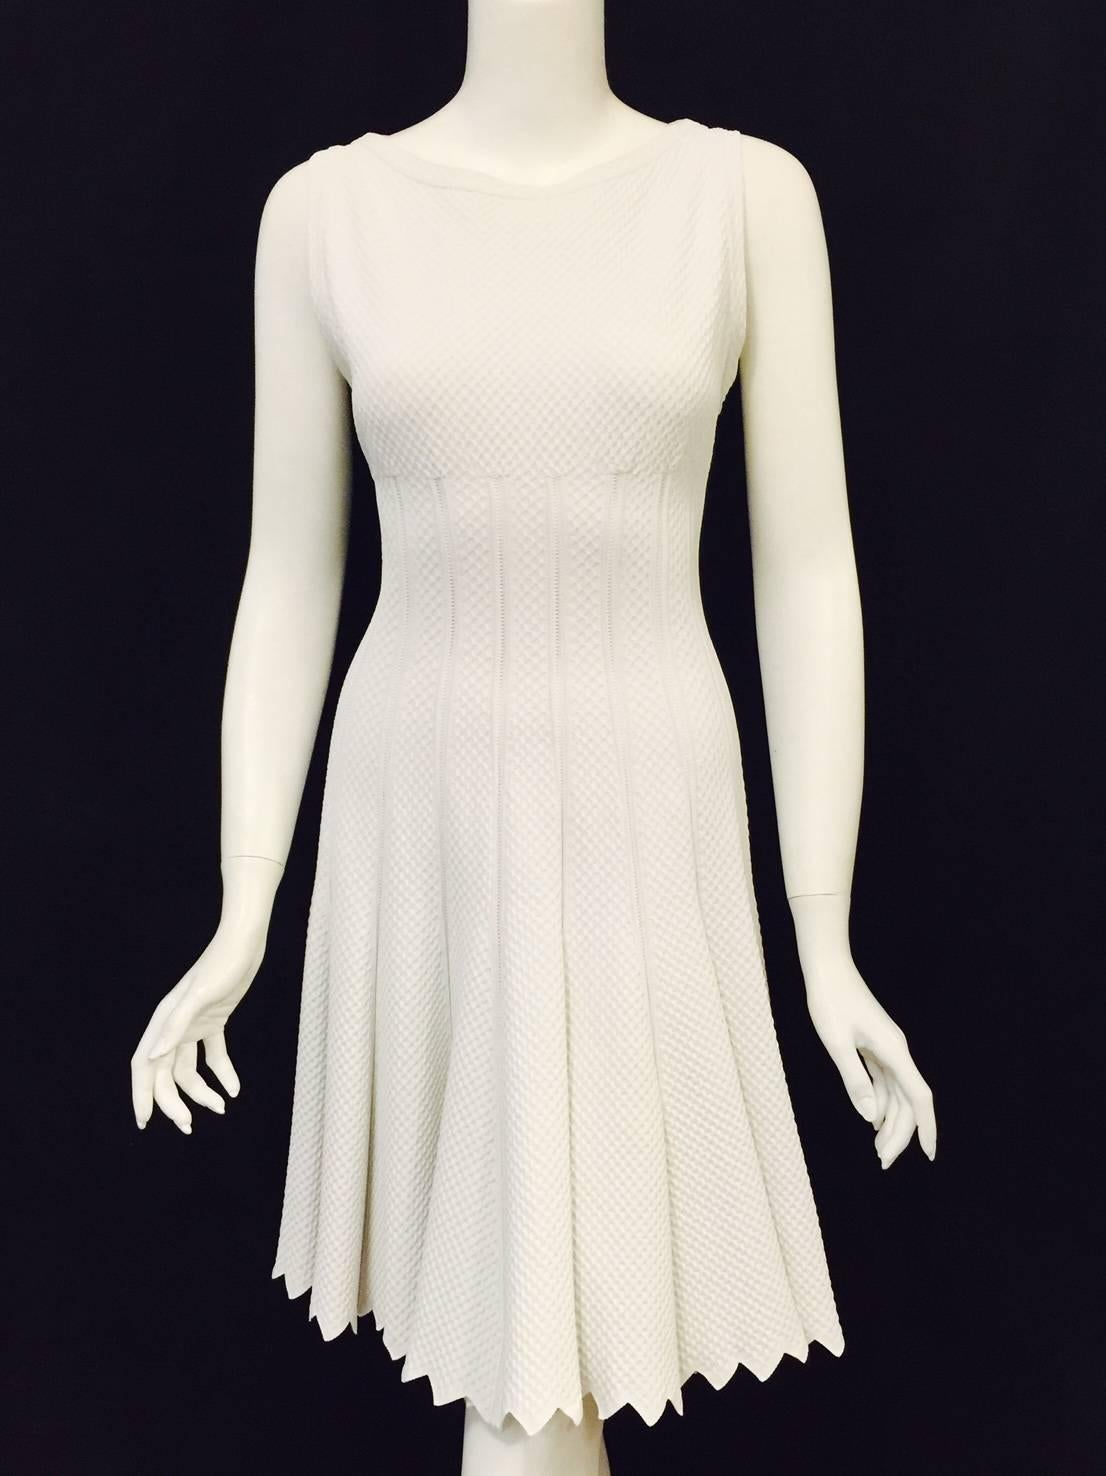 White Sleeveless Stretch Dress proves why Alaia is one of fashion's most celebrated designers!  Dress features the technologically advanced stretch material that Azzedine has called his signature since the 1980s.  Body conscious?   Alluring?  But of